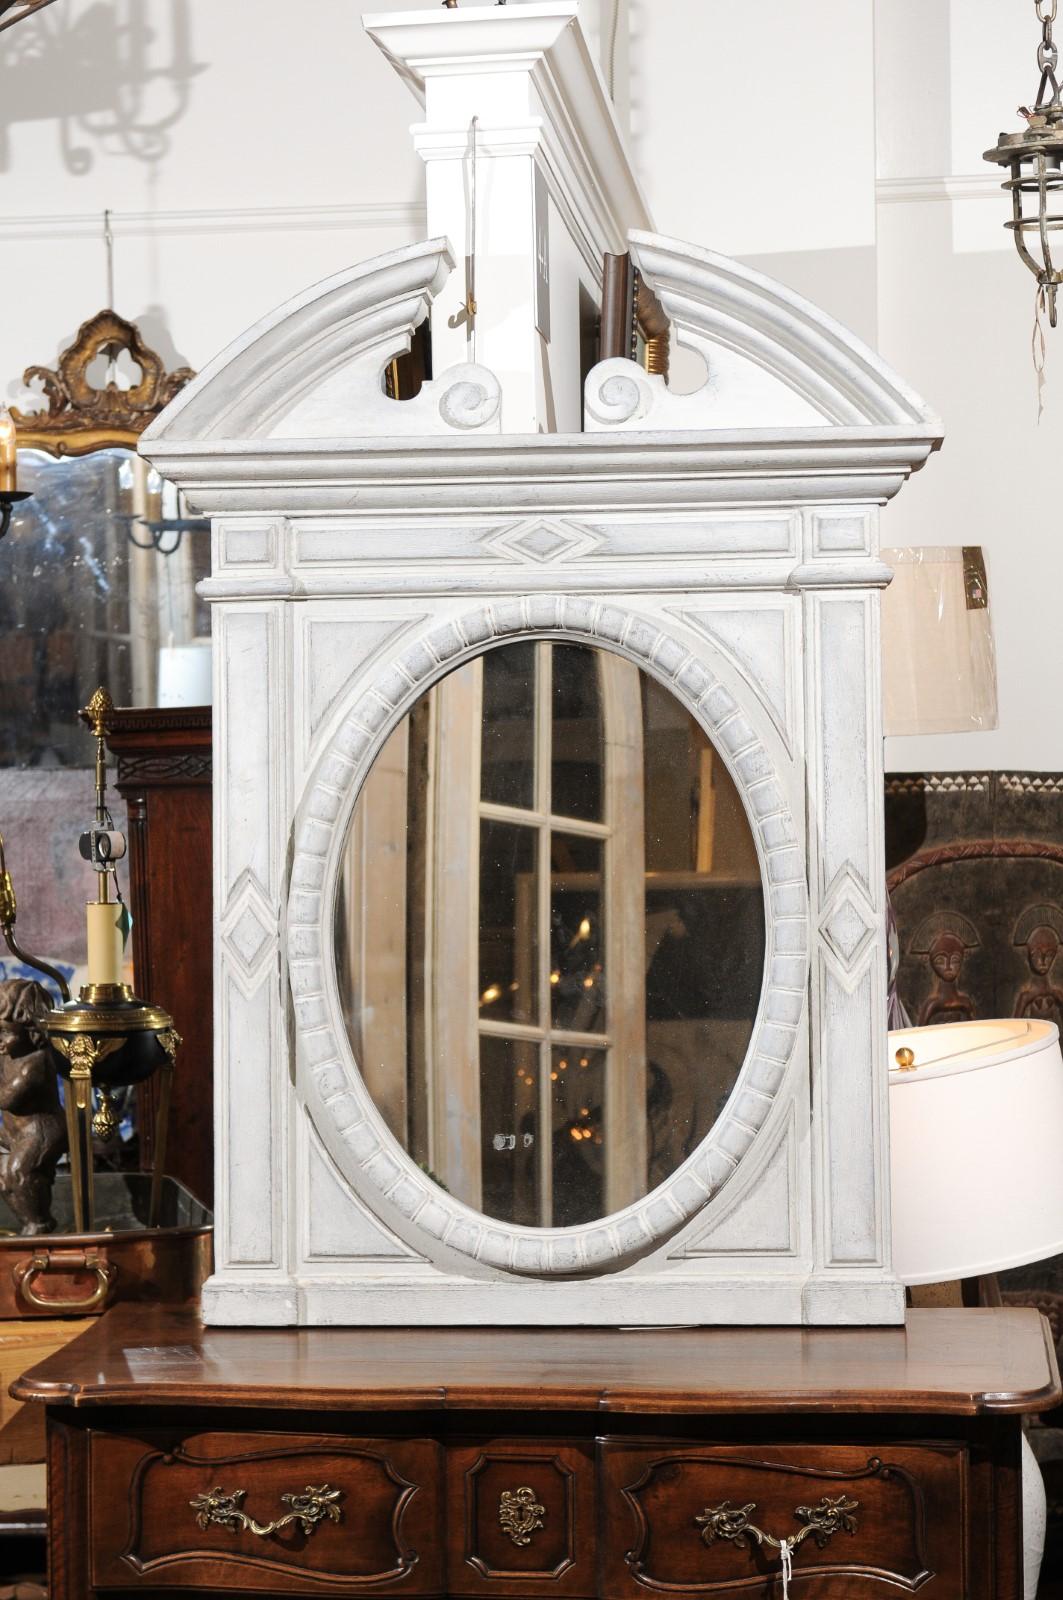 Renaissance Style 1850s Belgian Painted Oval Mirror with Broken Arch Pediment (Holz) im Angebot